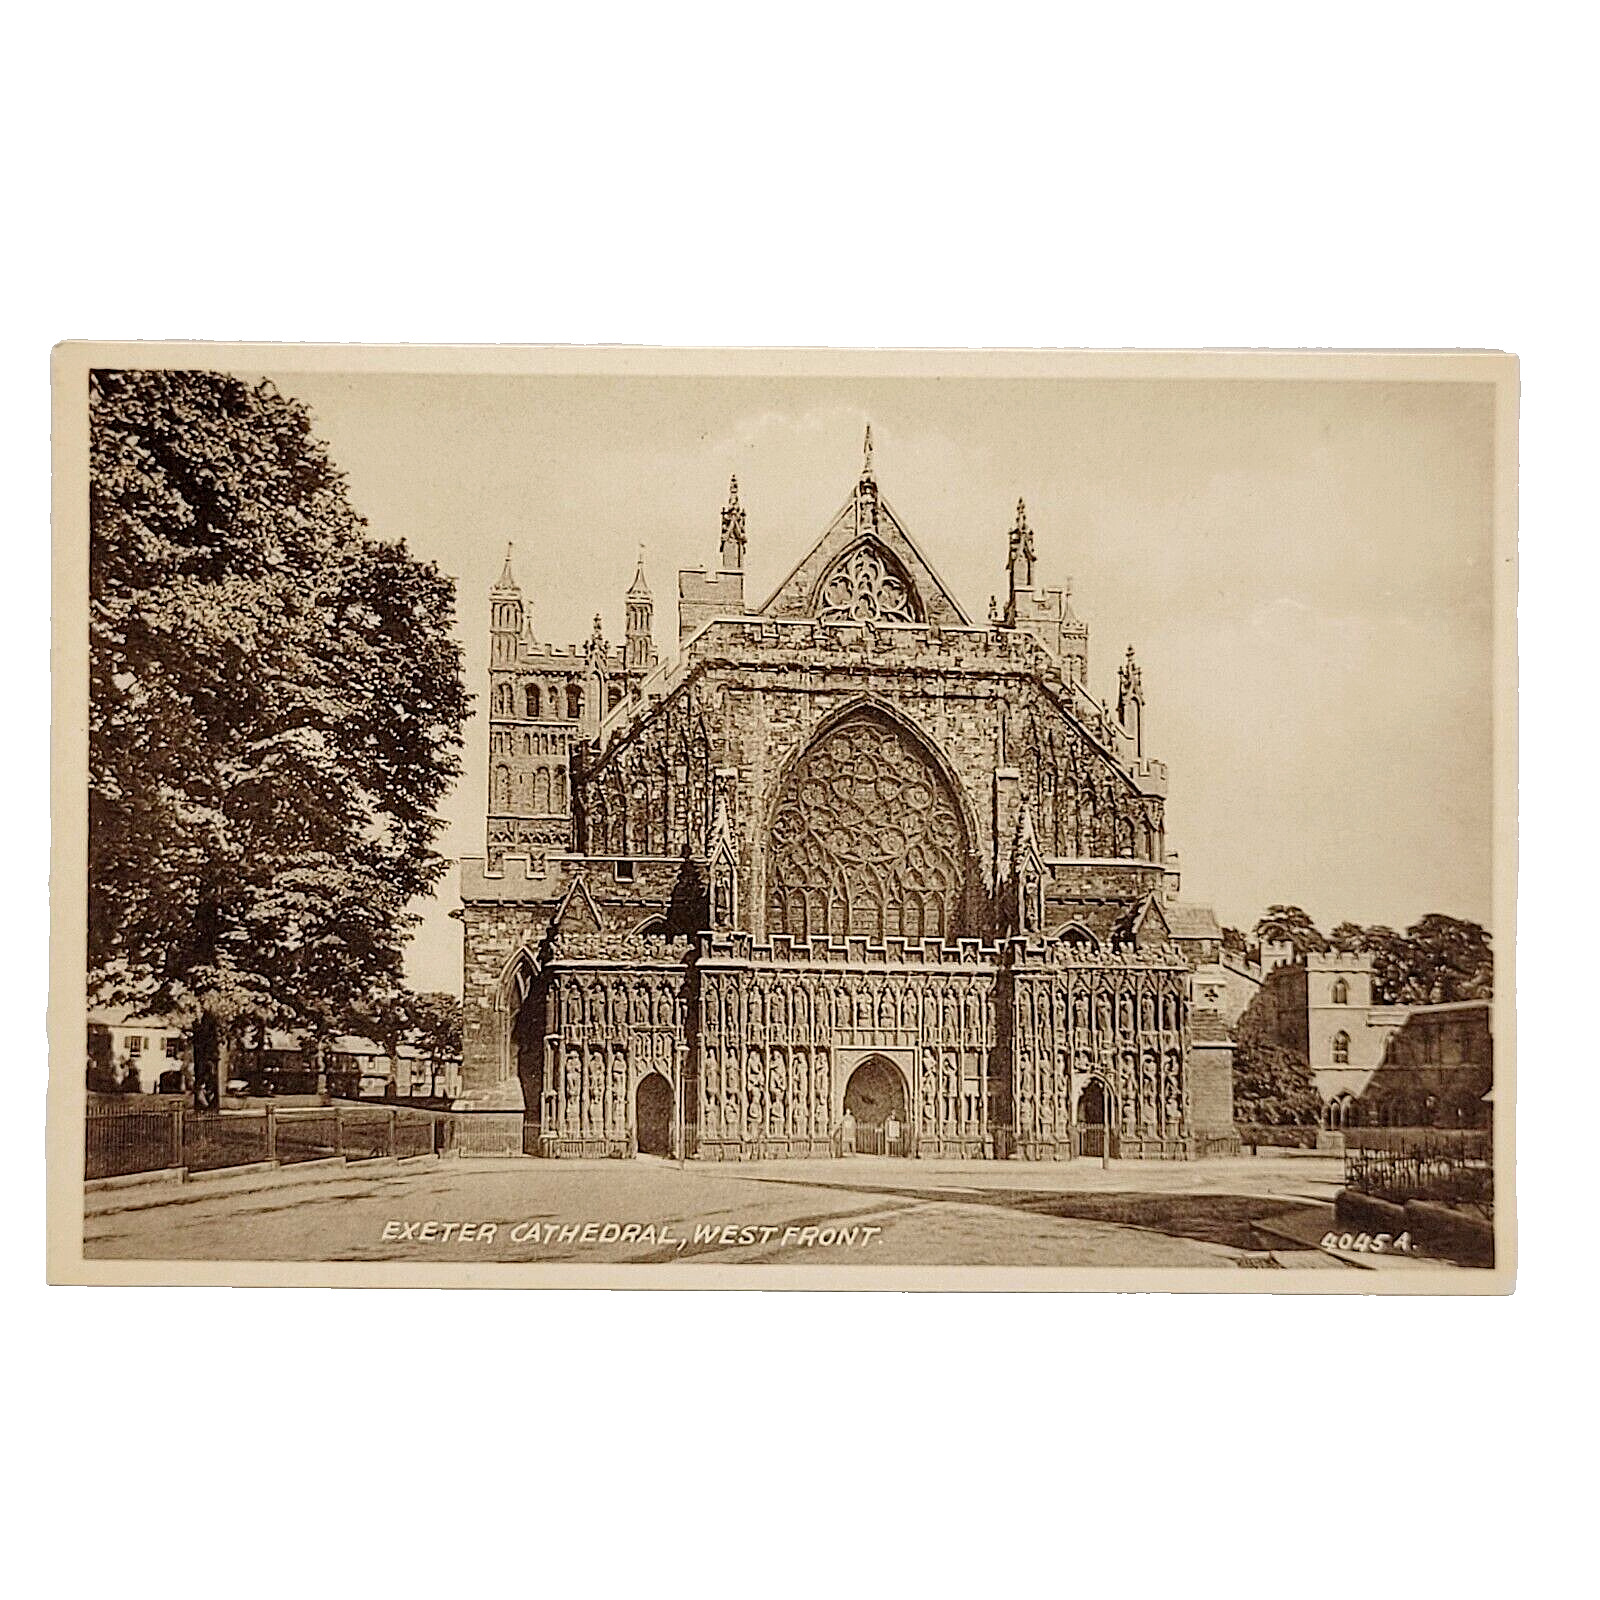 Exeter Cathedral West Front Image 1910s Black White Postcard White Border Unused